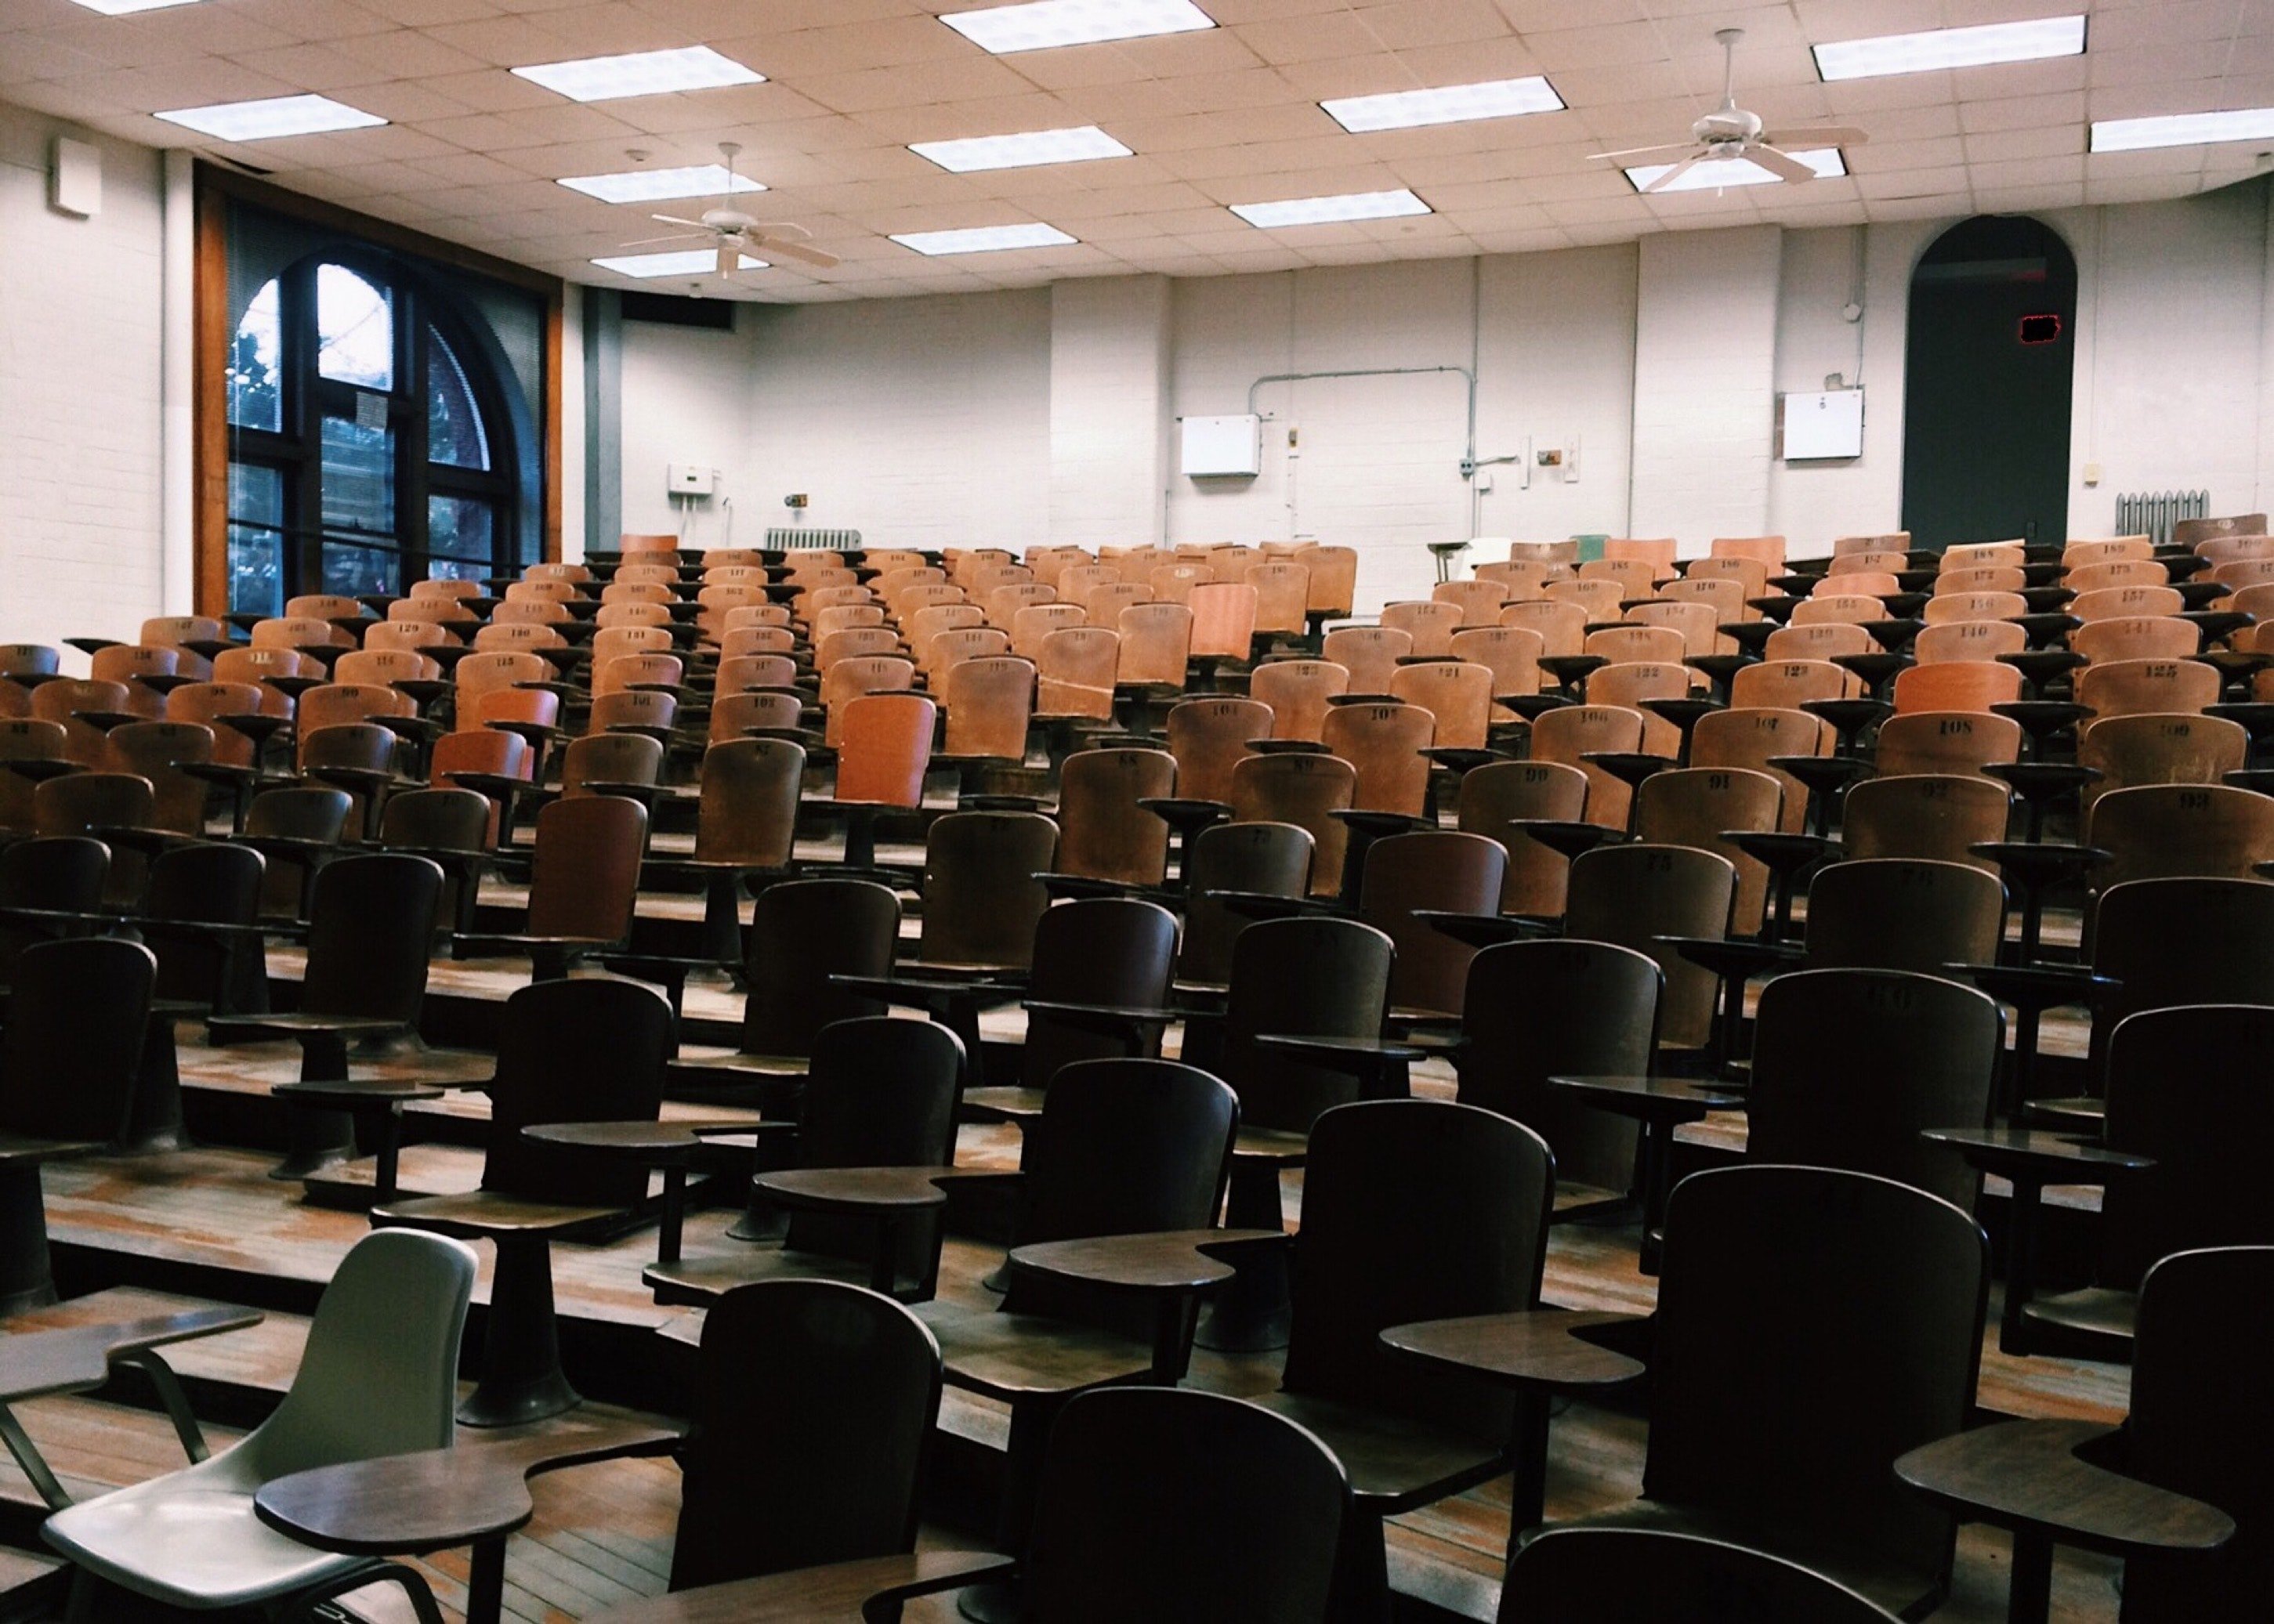 Everyone began to leave the lecture hall | Source: Pexels